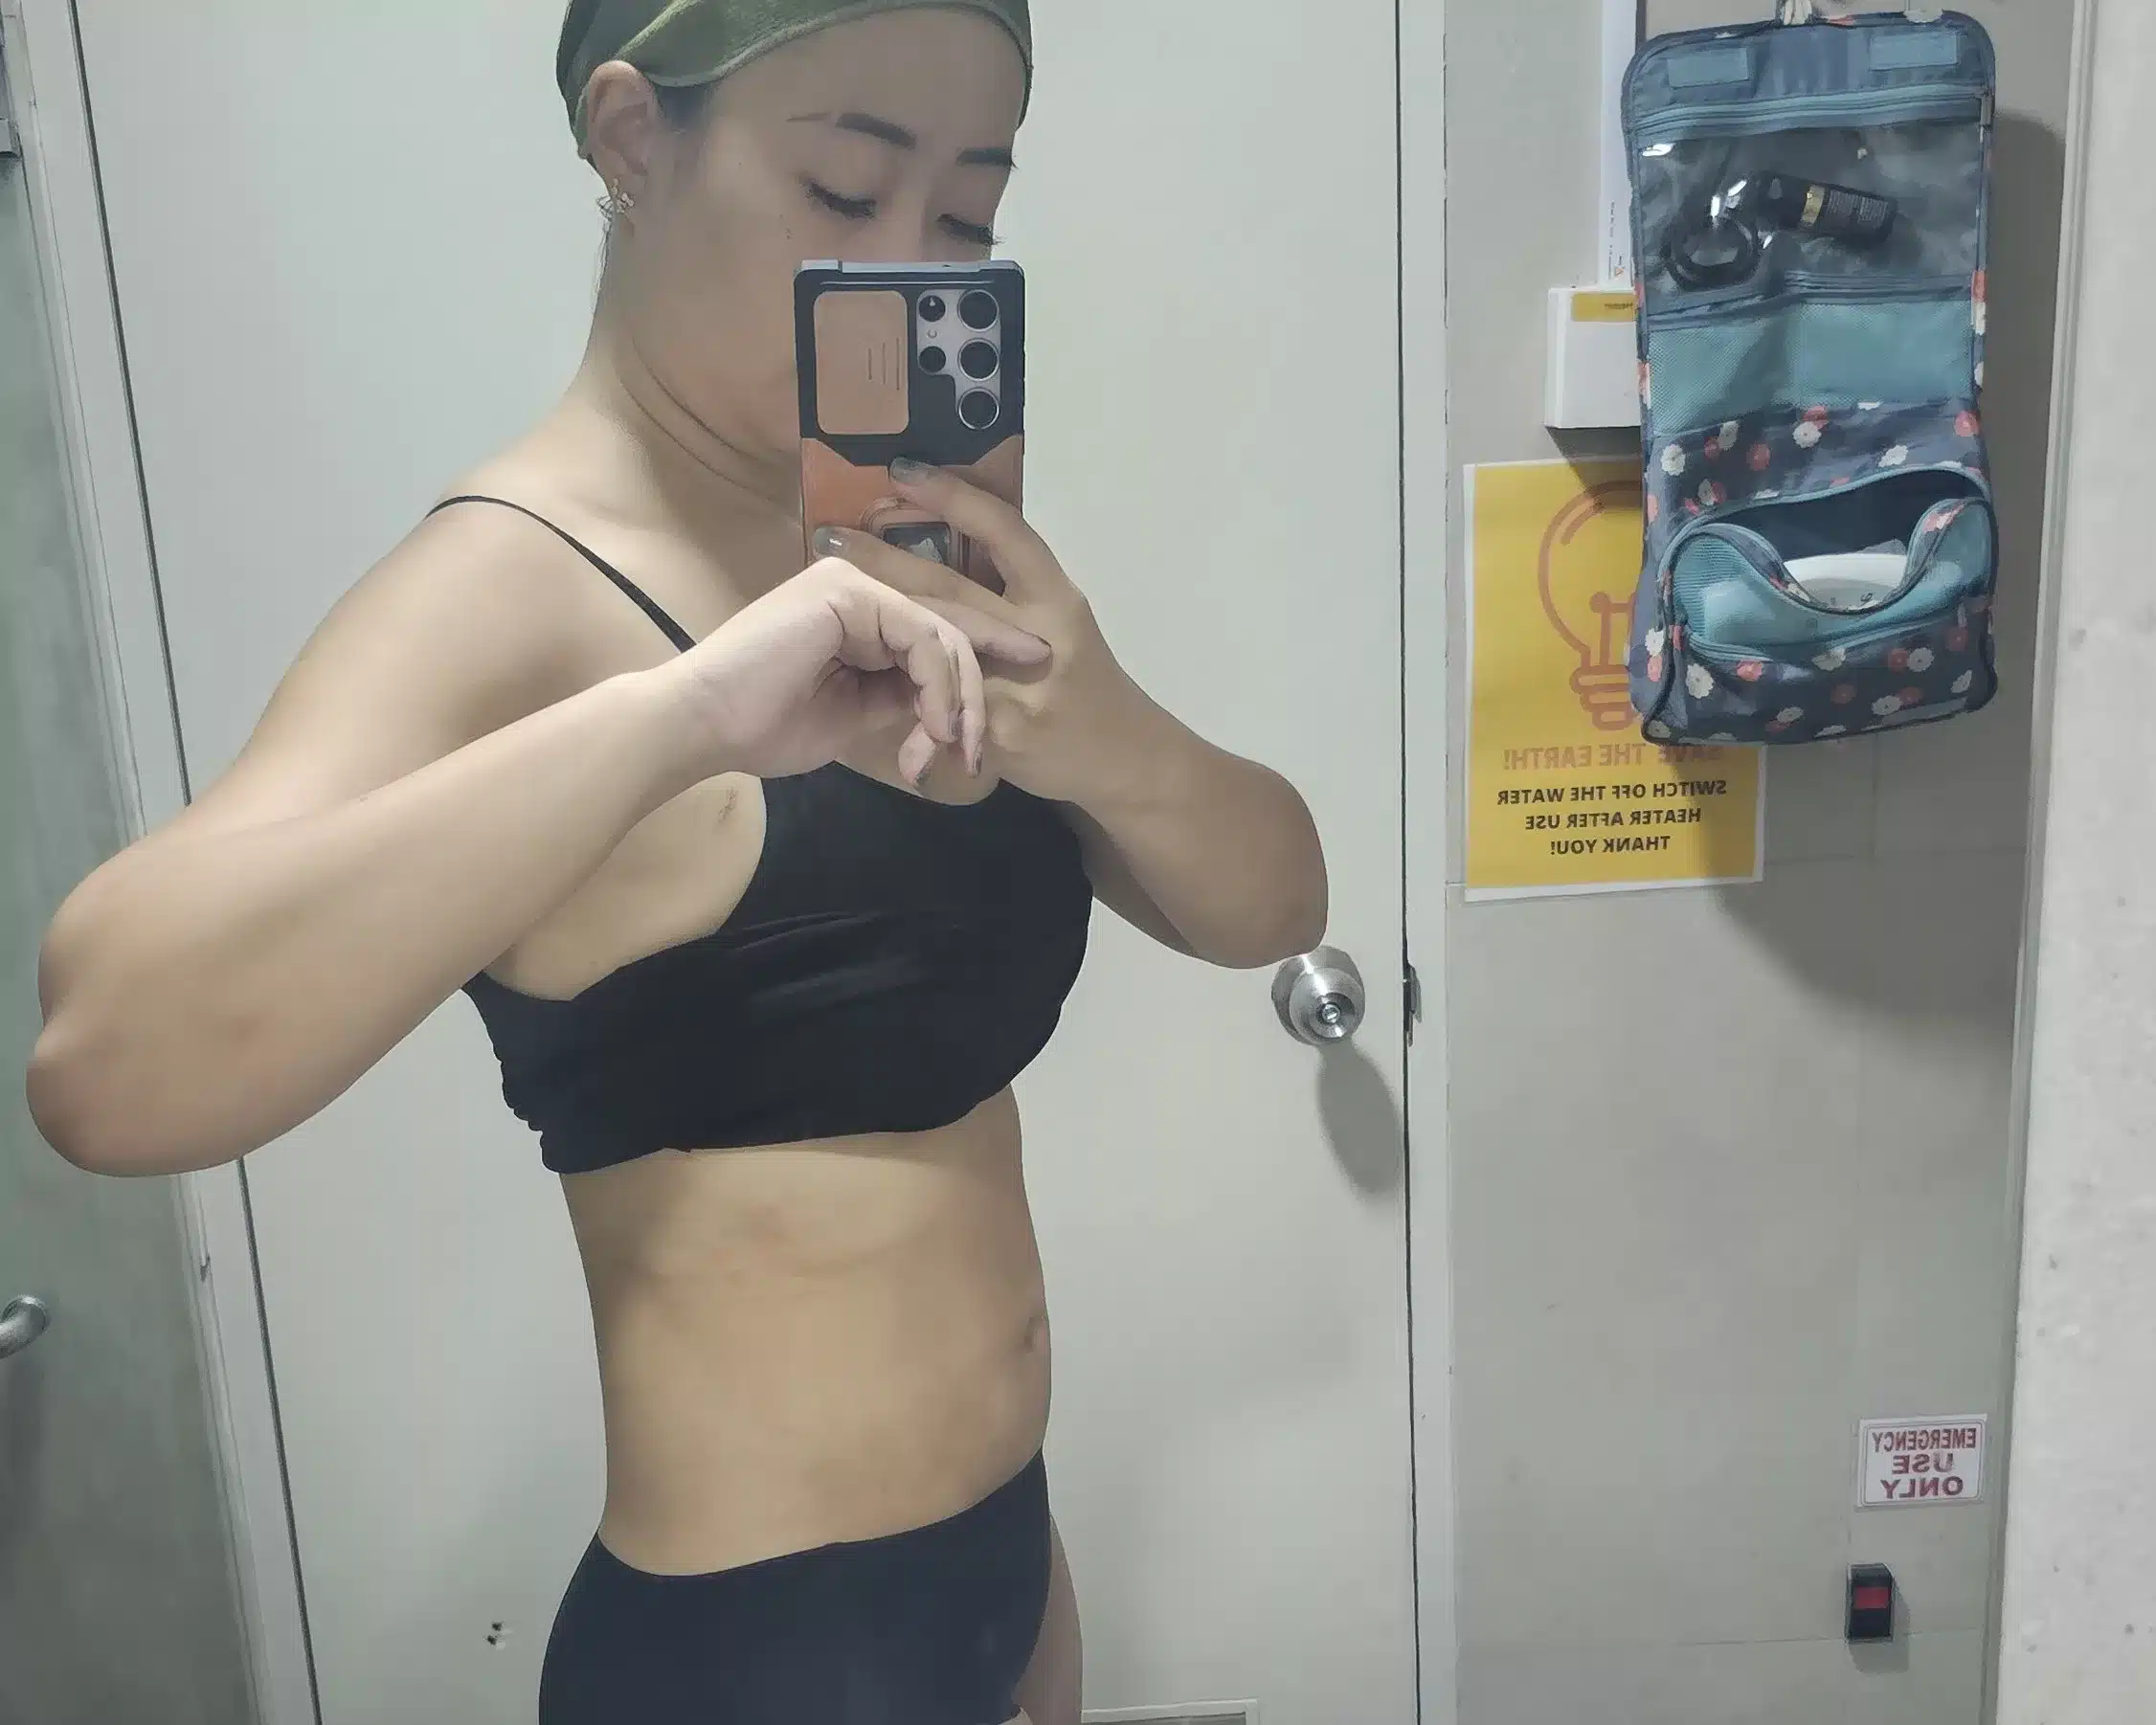 Tummy Liposuction, J Plasma and Breast Augmentation At BKK - Results and Recovery 10